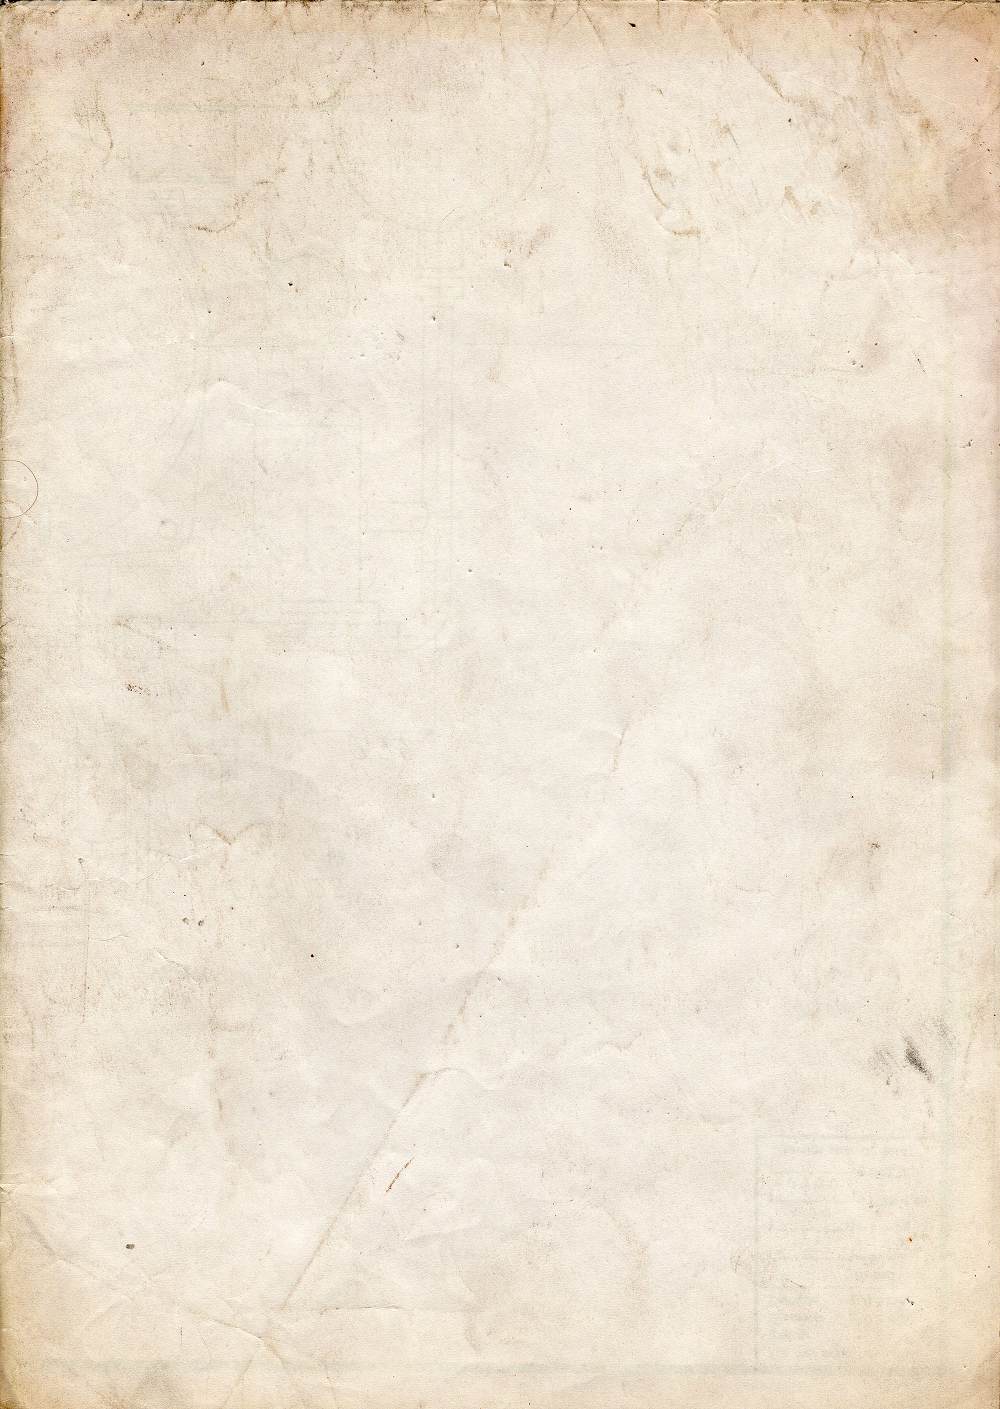 tpl/default/images/Paper_texture_v5_by_bashcorpo_w1000.jpg